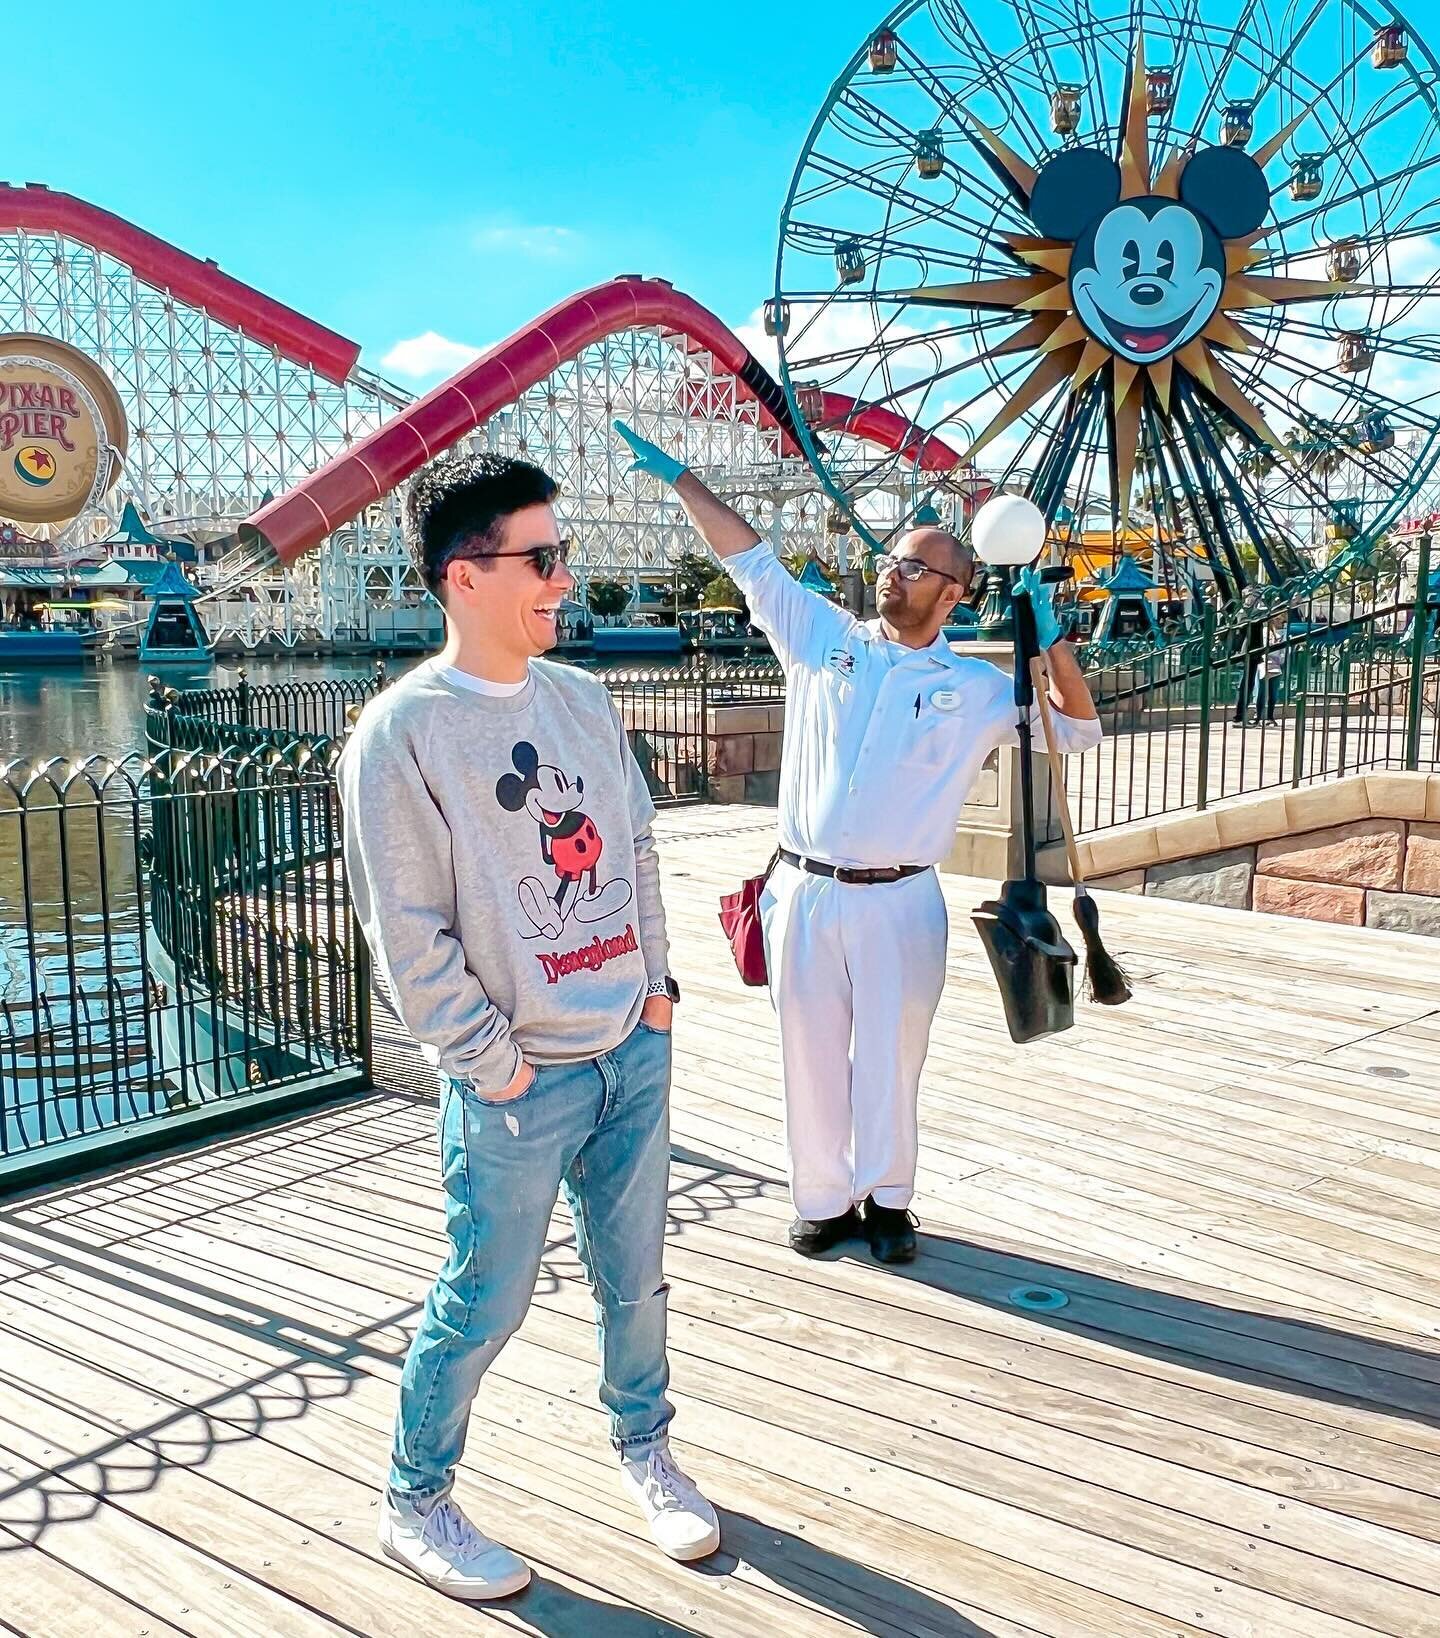 TODAY IS A SPECIAL DISNEY DAY ✨ Disney California Adventure is 23 years old! Can you believe that?! 

Let&rsquo;s chat all things DCA! ⬇️

⭐️What&rsquo;s your favorite thing about DCA? 
⭐️If you could change one thing, what would it be? 
⭐️Do you rem